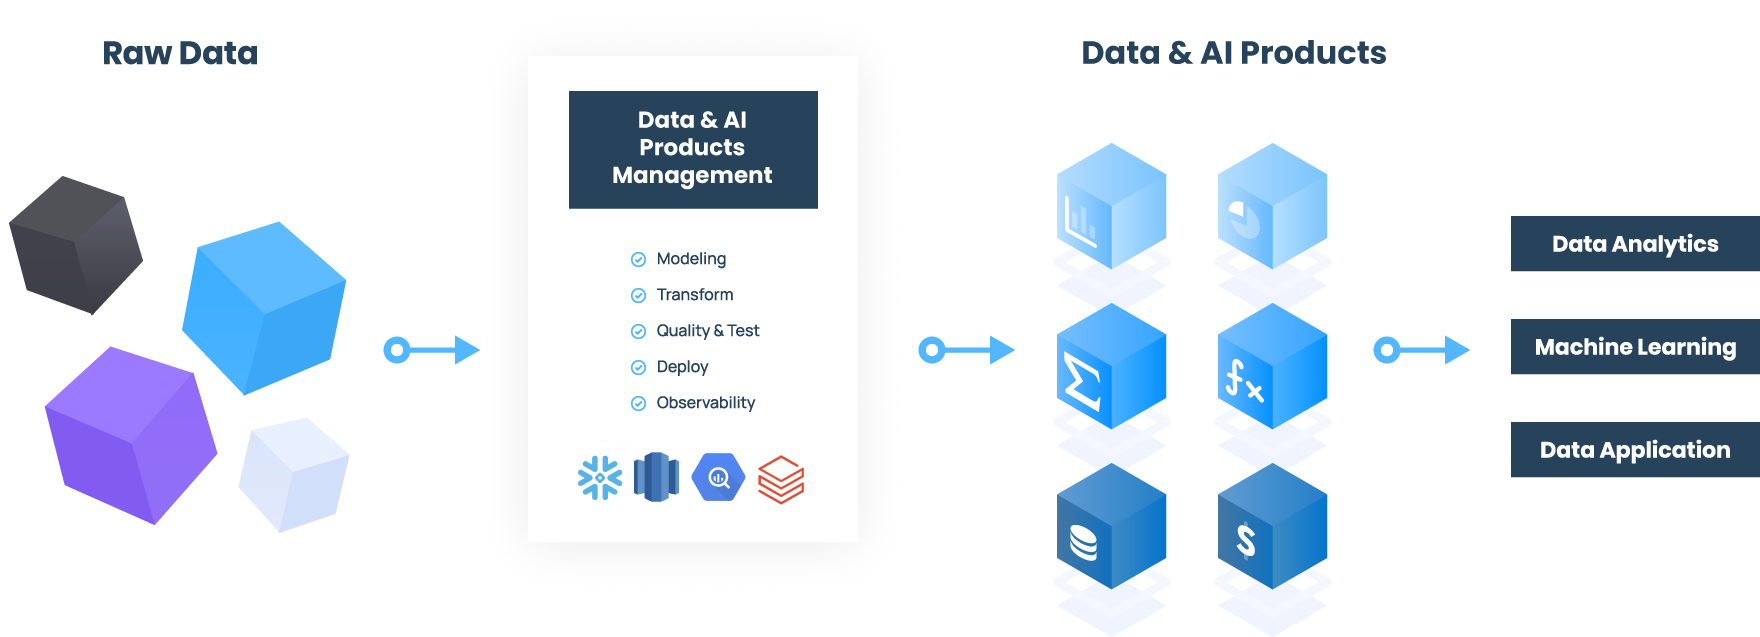 triggo.ai |DataOps, Building Reliable Data Products, Modeling, Transform, Quality & Test, Deploy, Observability